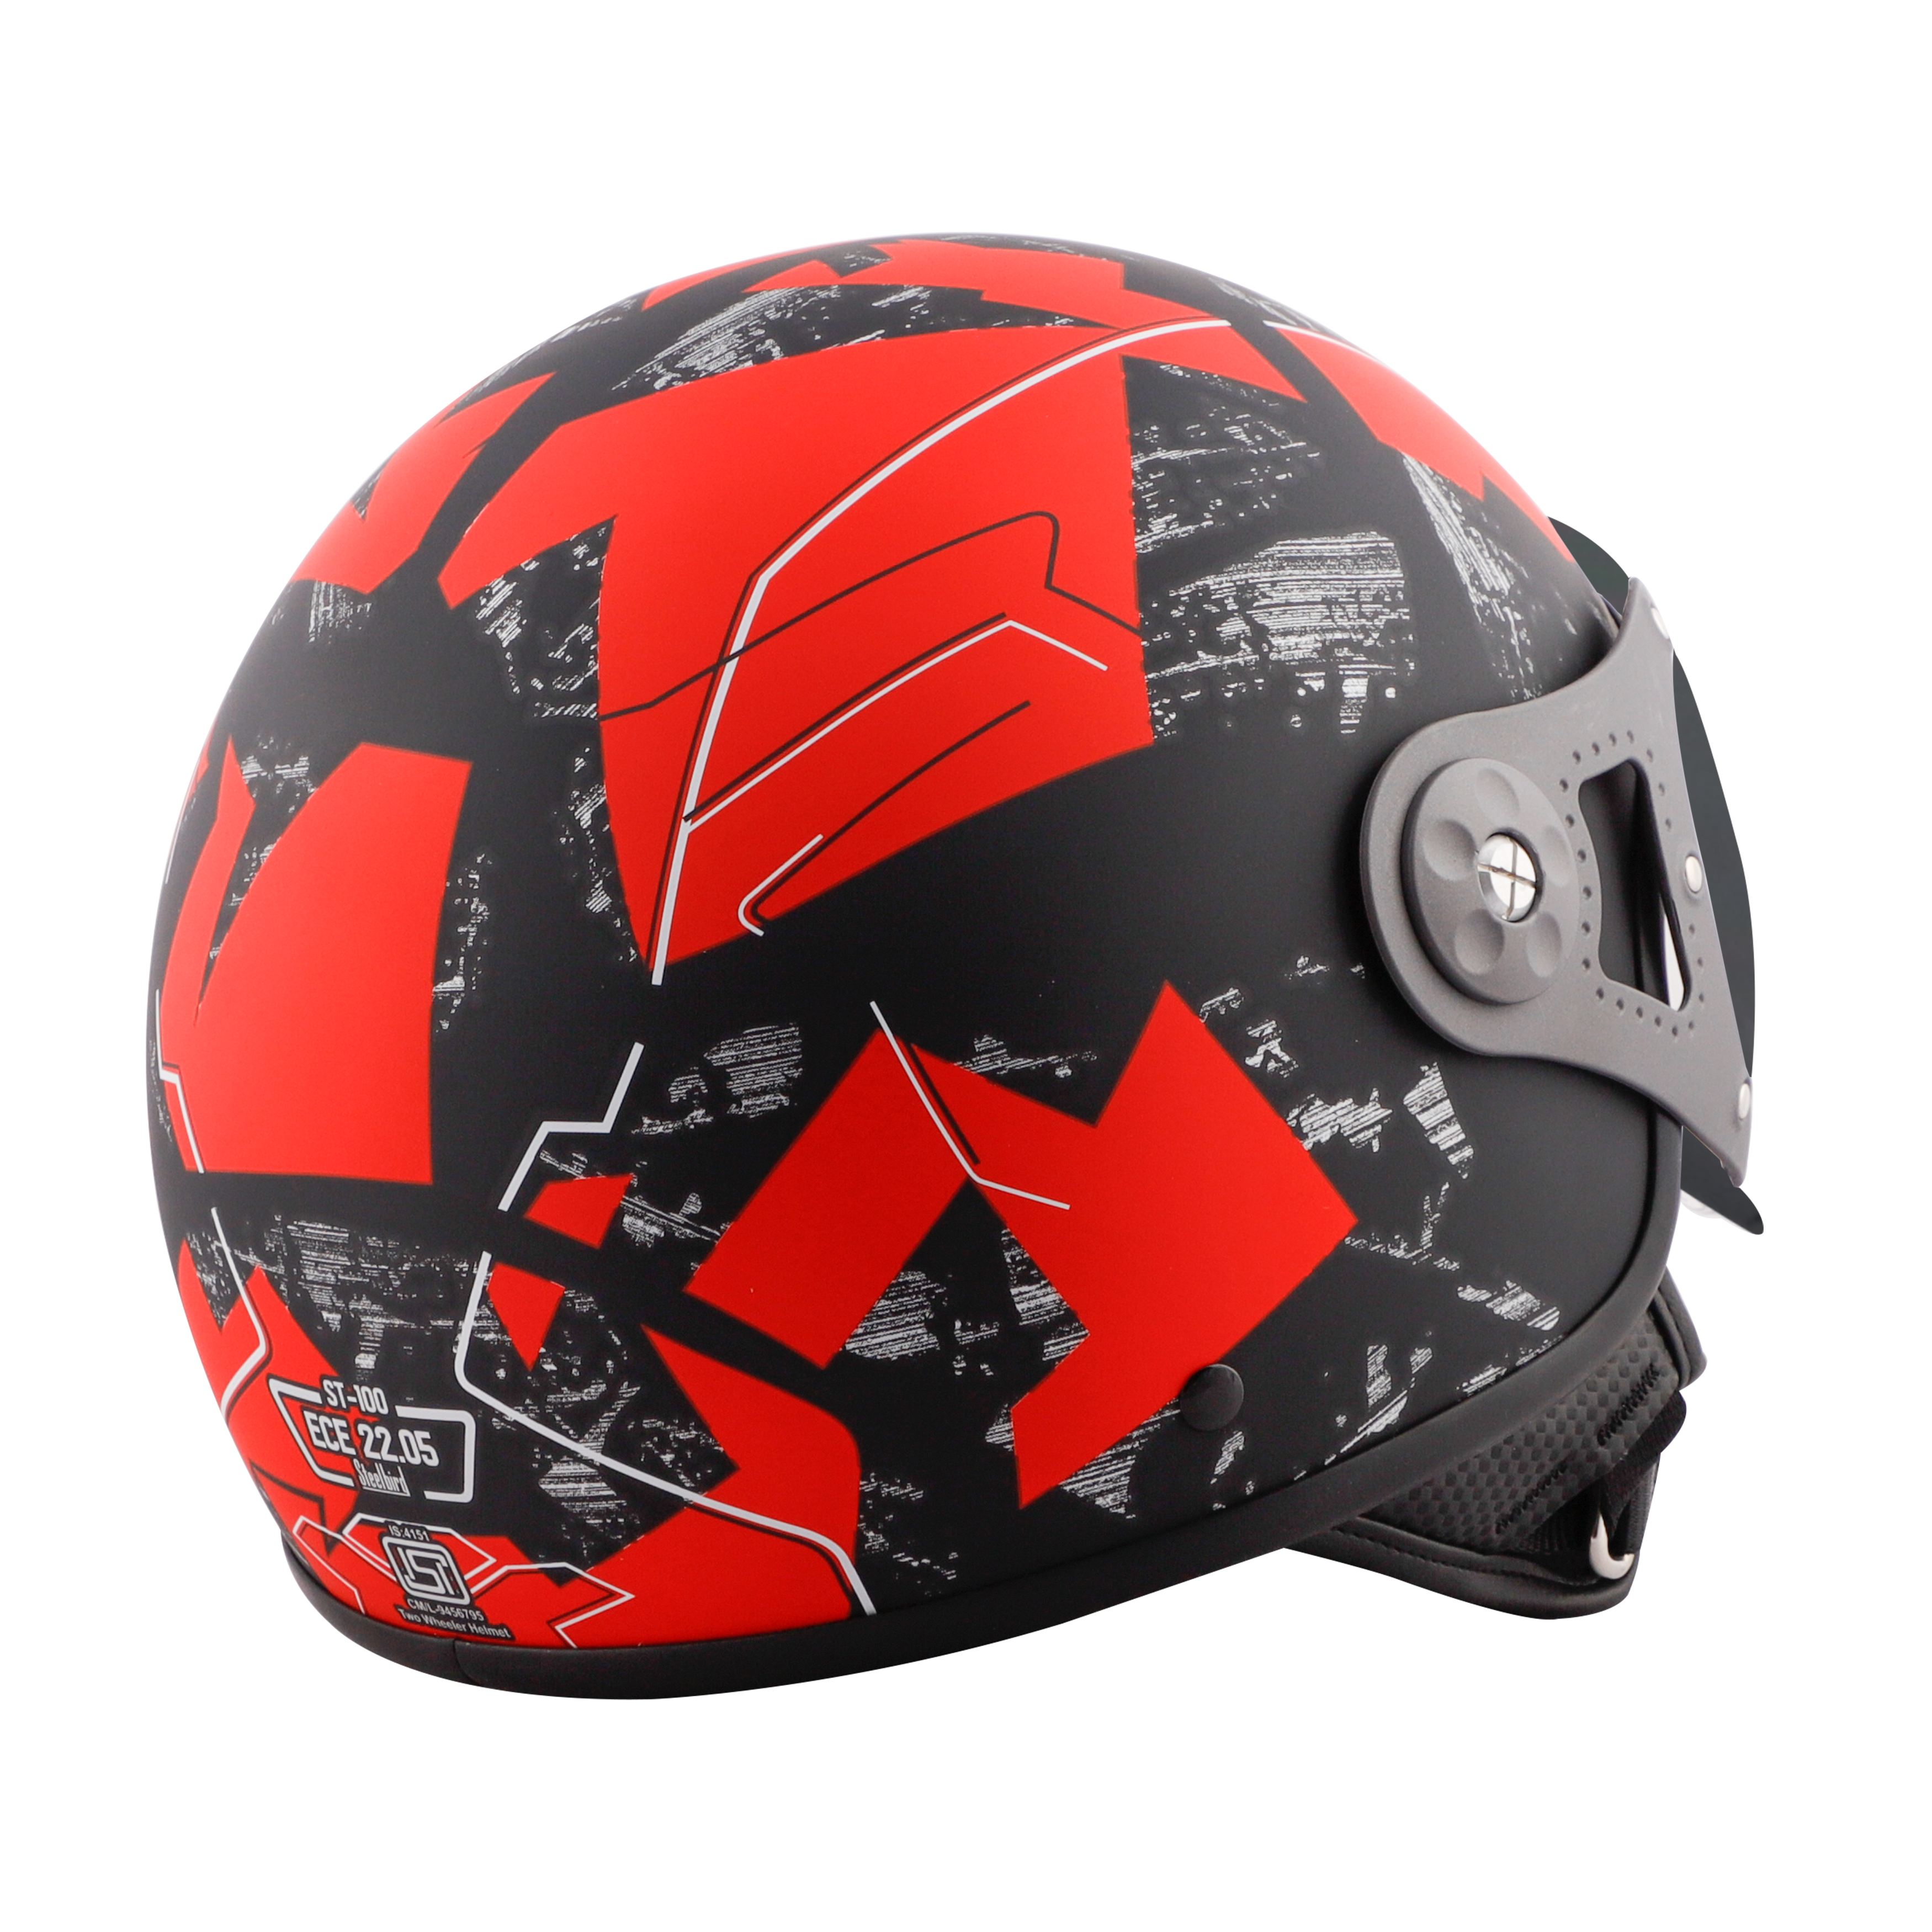 ST-100 CAMO ECE MAT BLACK WITH RED (FITTED WITH CLEAR VISOR. SMOKE VISOR ONLY FOR ILLUSTRATION PURPOSE)